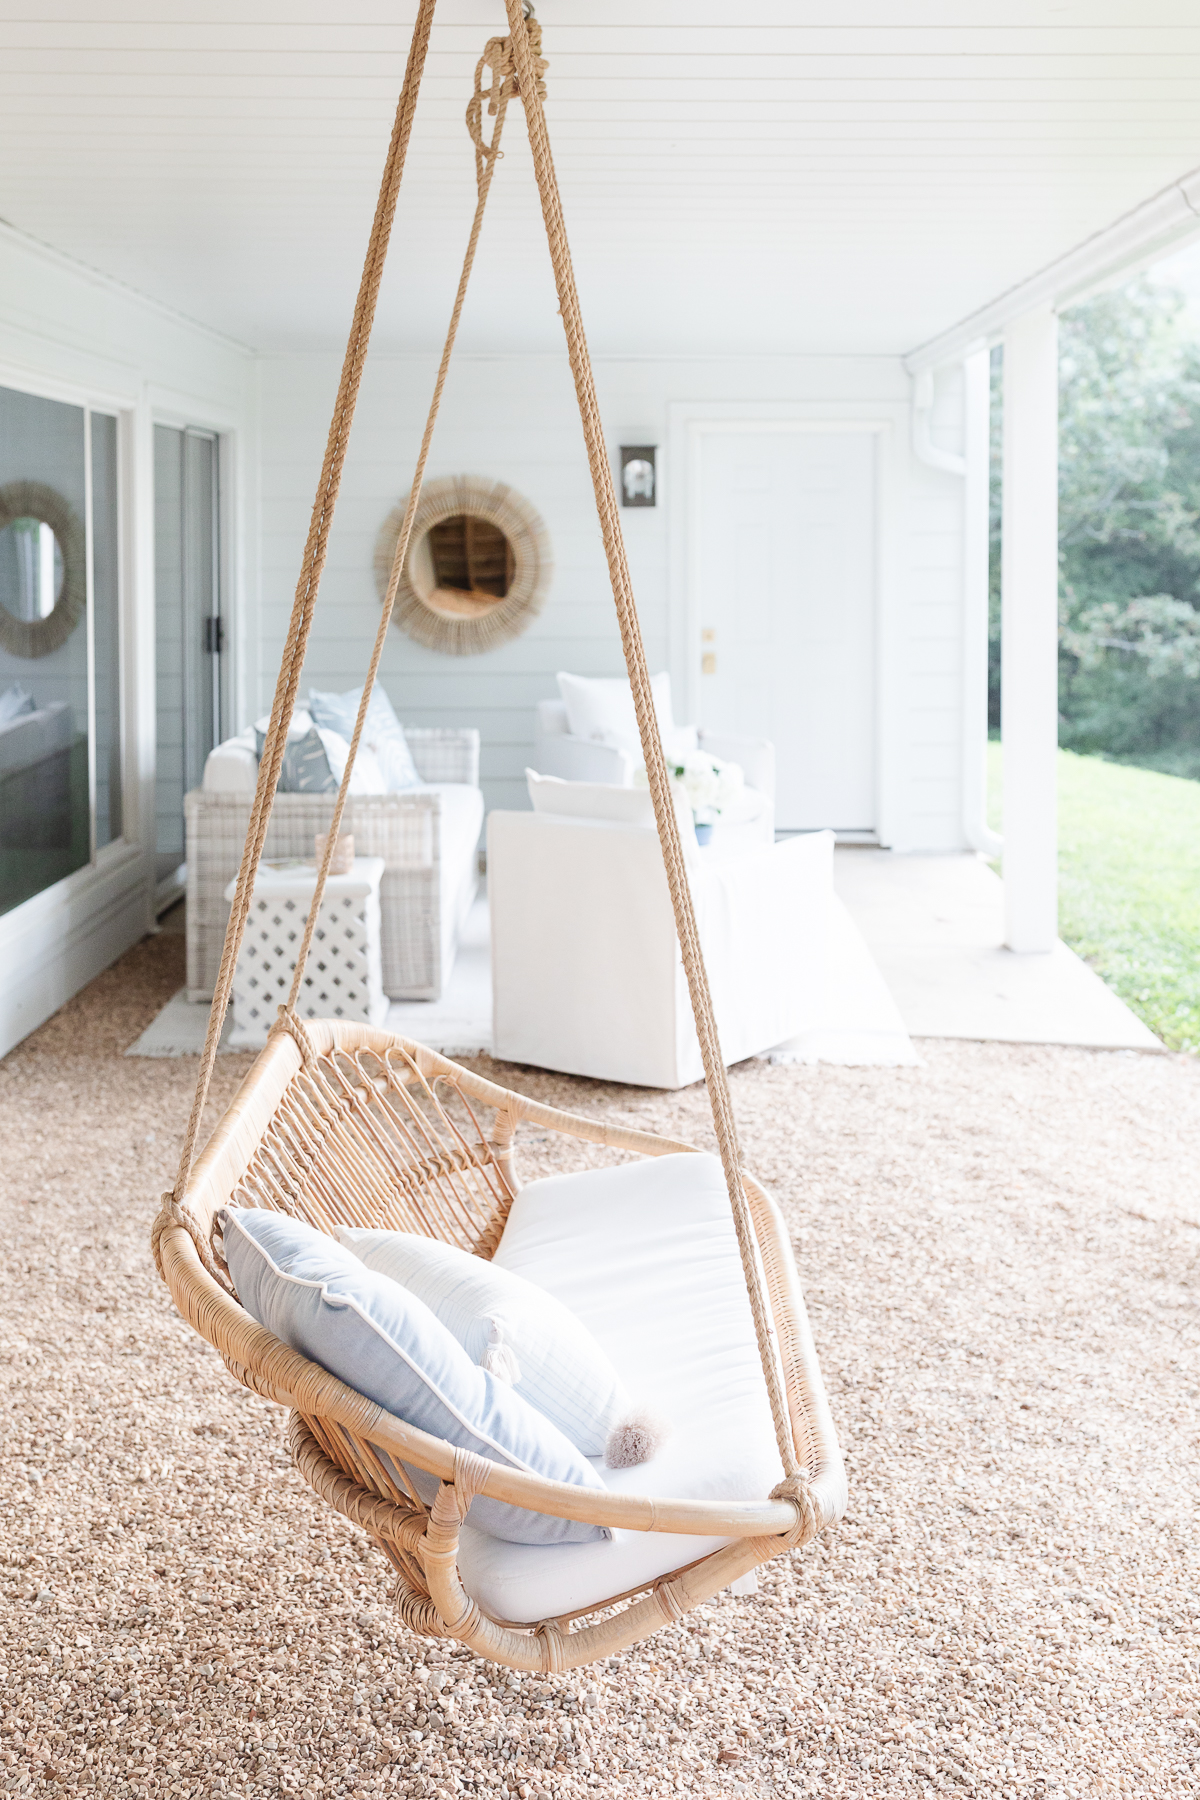 A wicker swing hanging from a porch, perfect for relaxing with outdoor pillows.